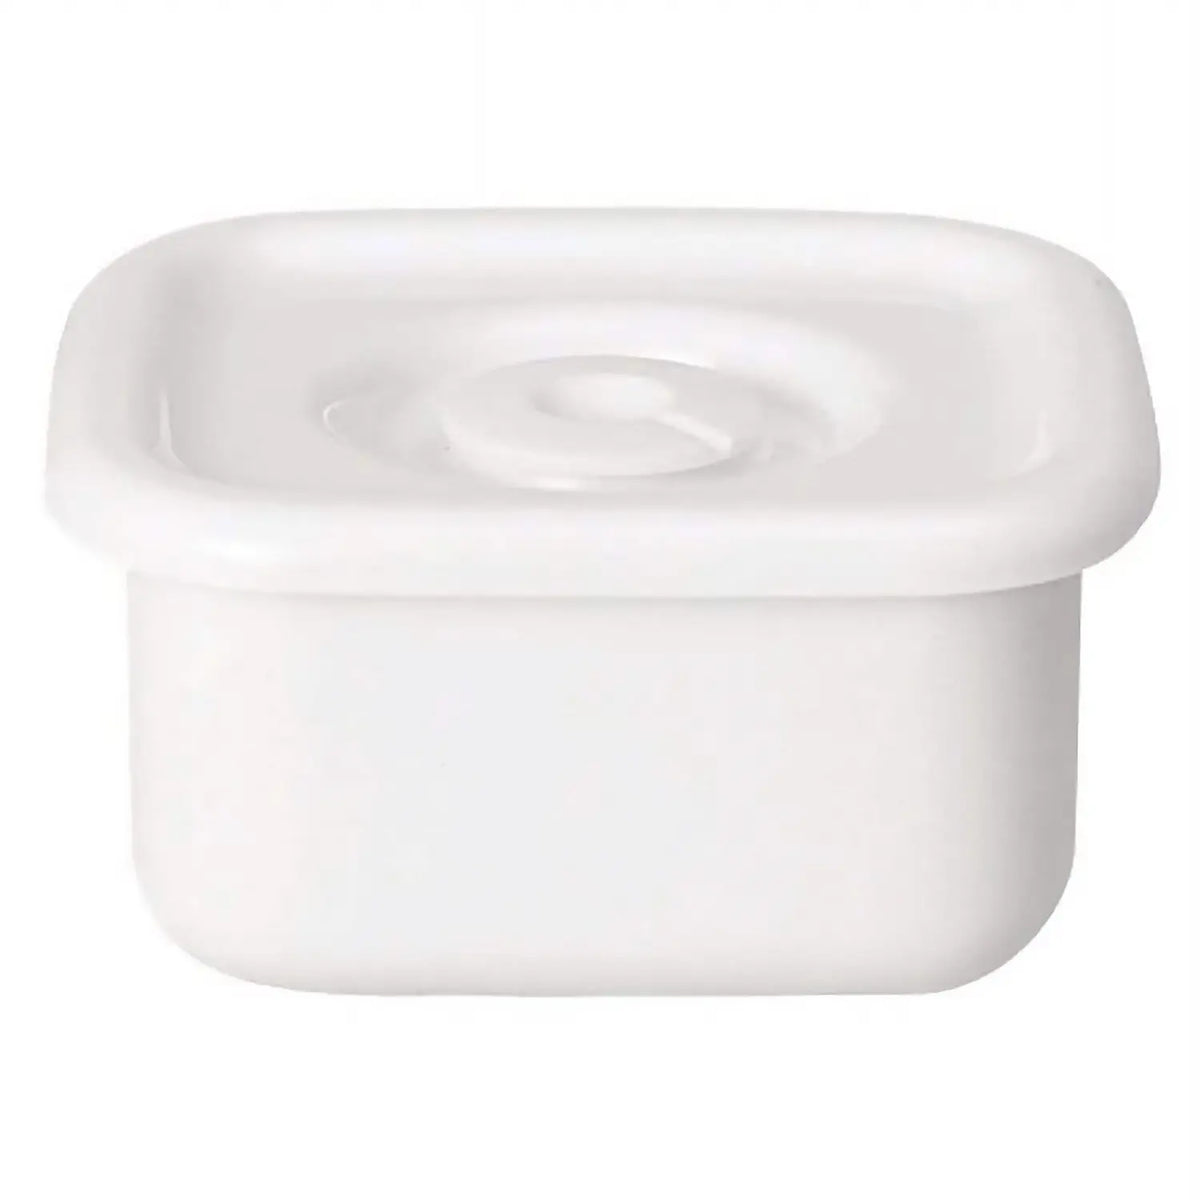 Noda Horo White Series Enamel Square Food Containers with Sealed Lid